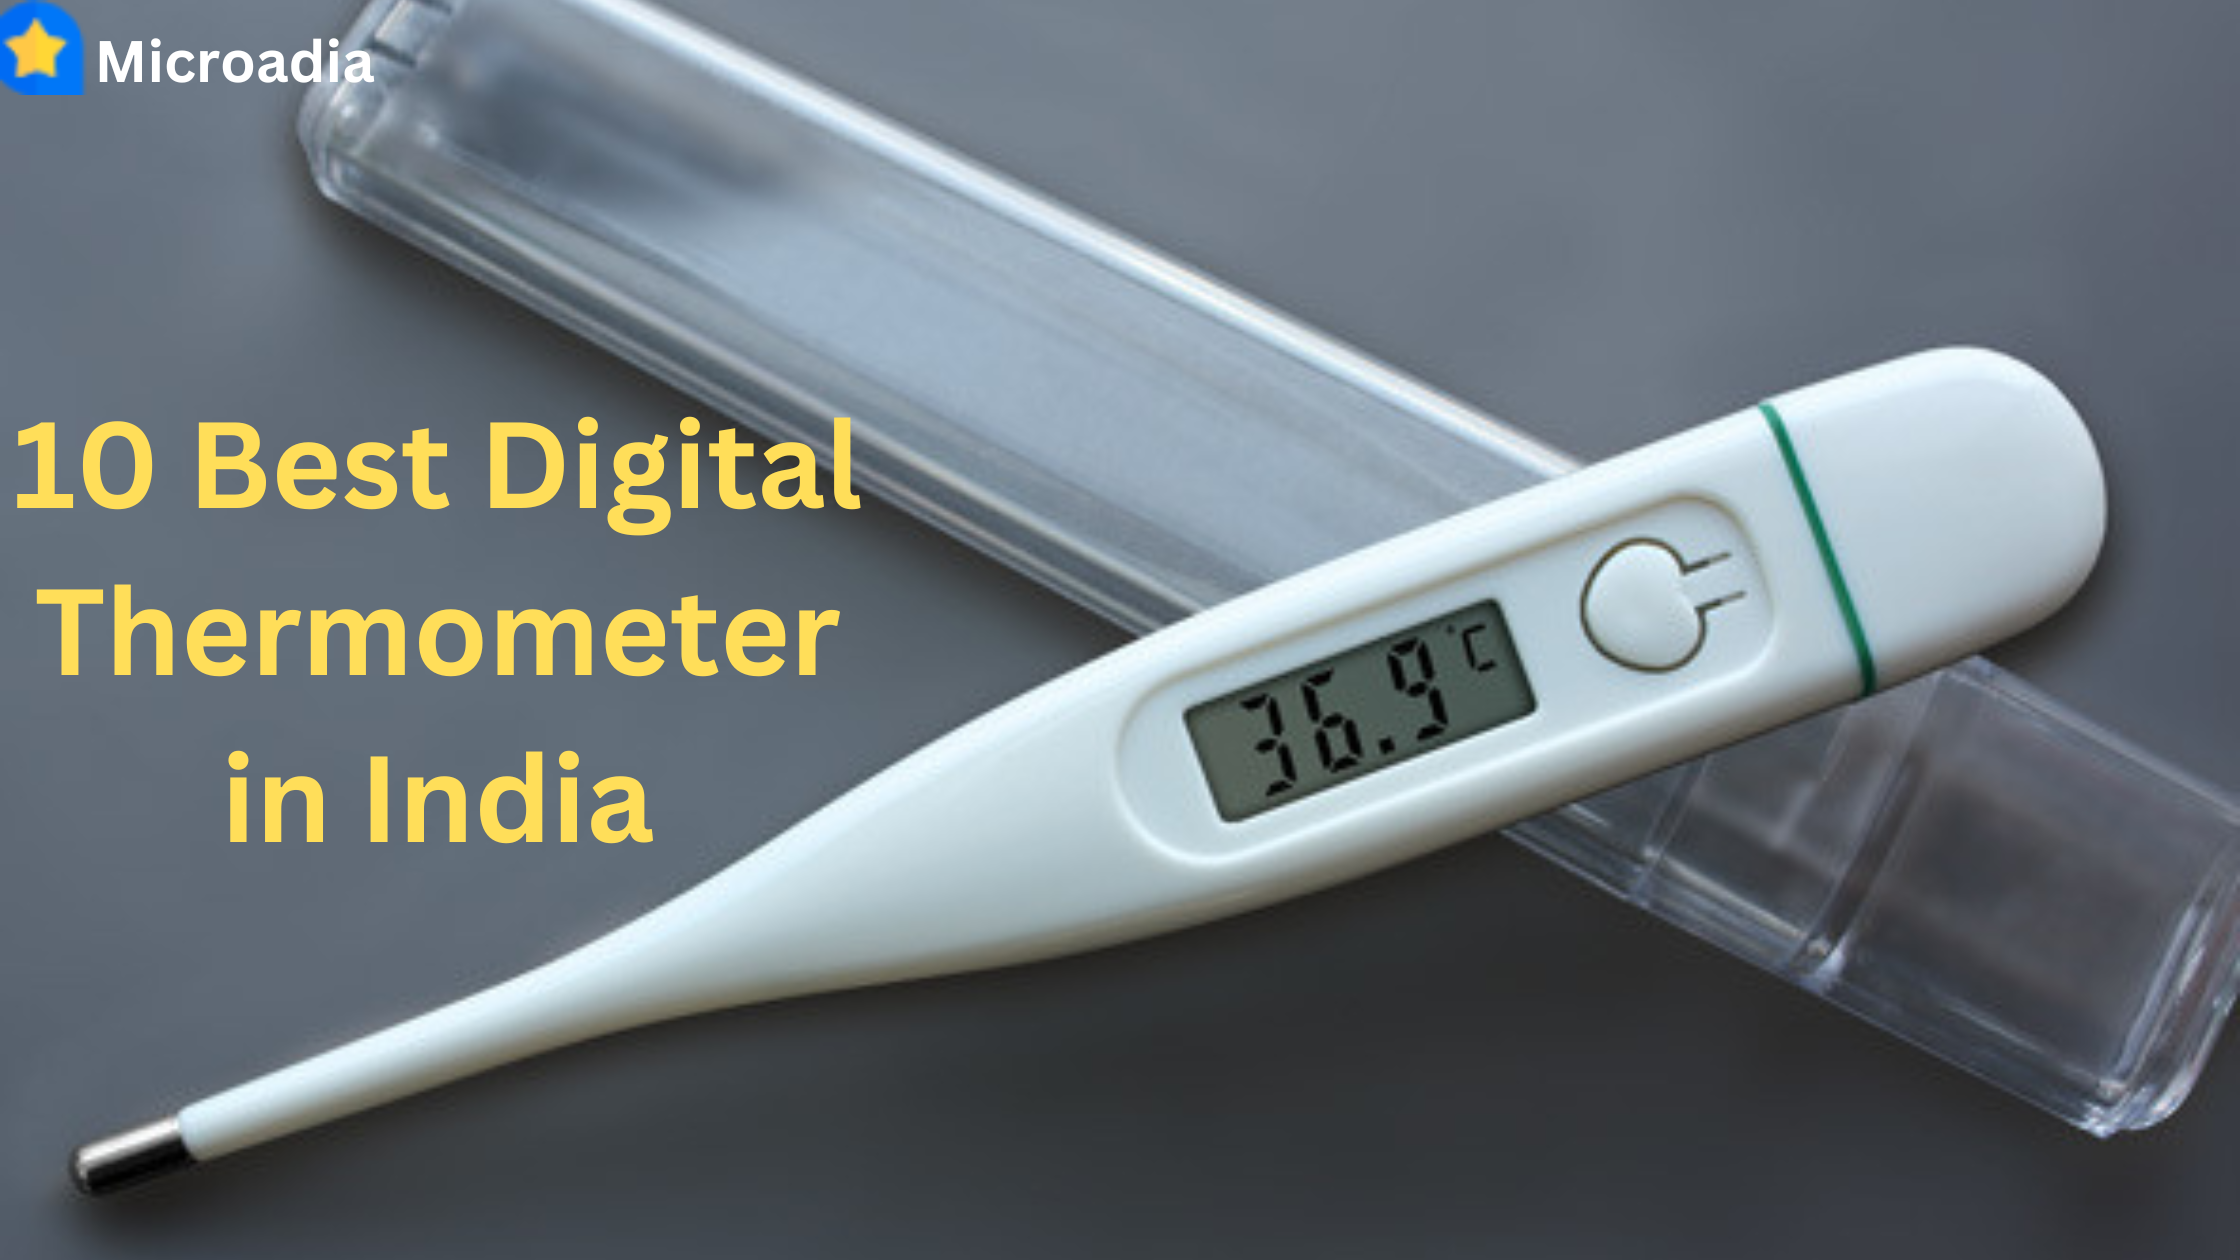 10 best Digital Thermometer in India